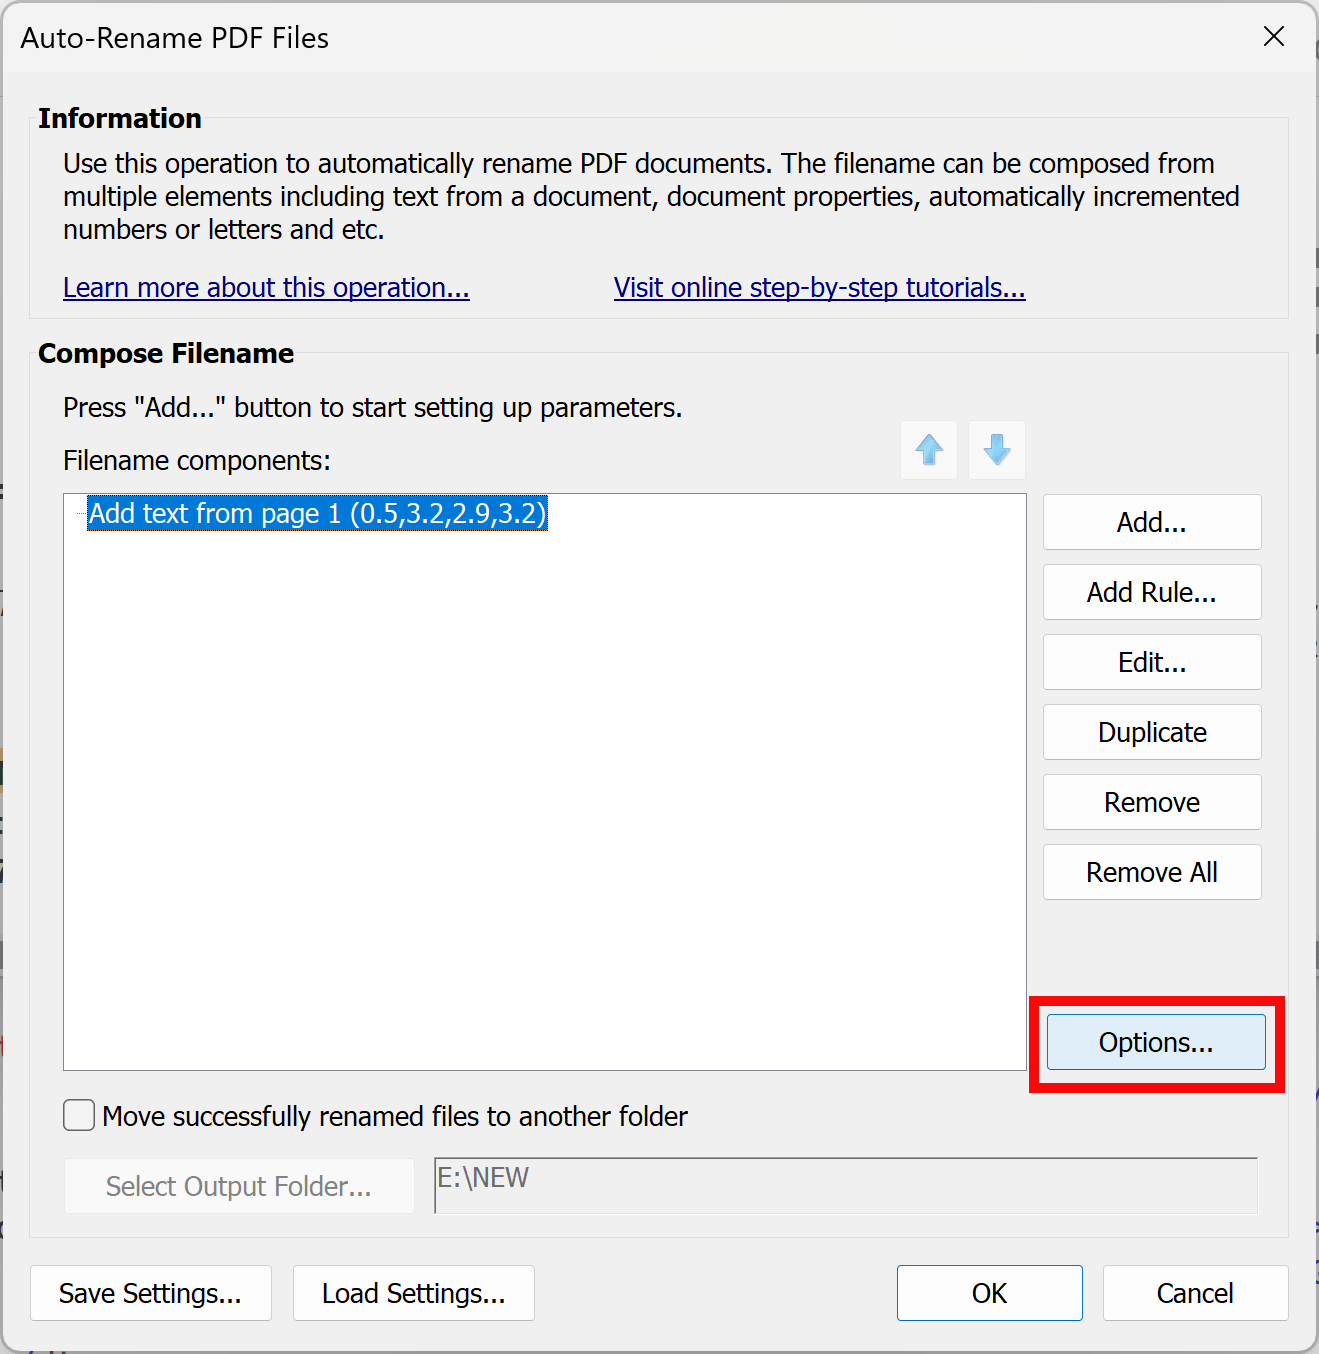 Press Options button to access Options dialog